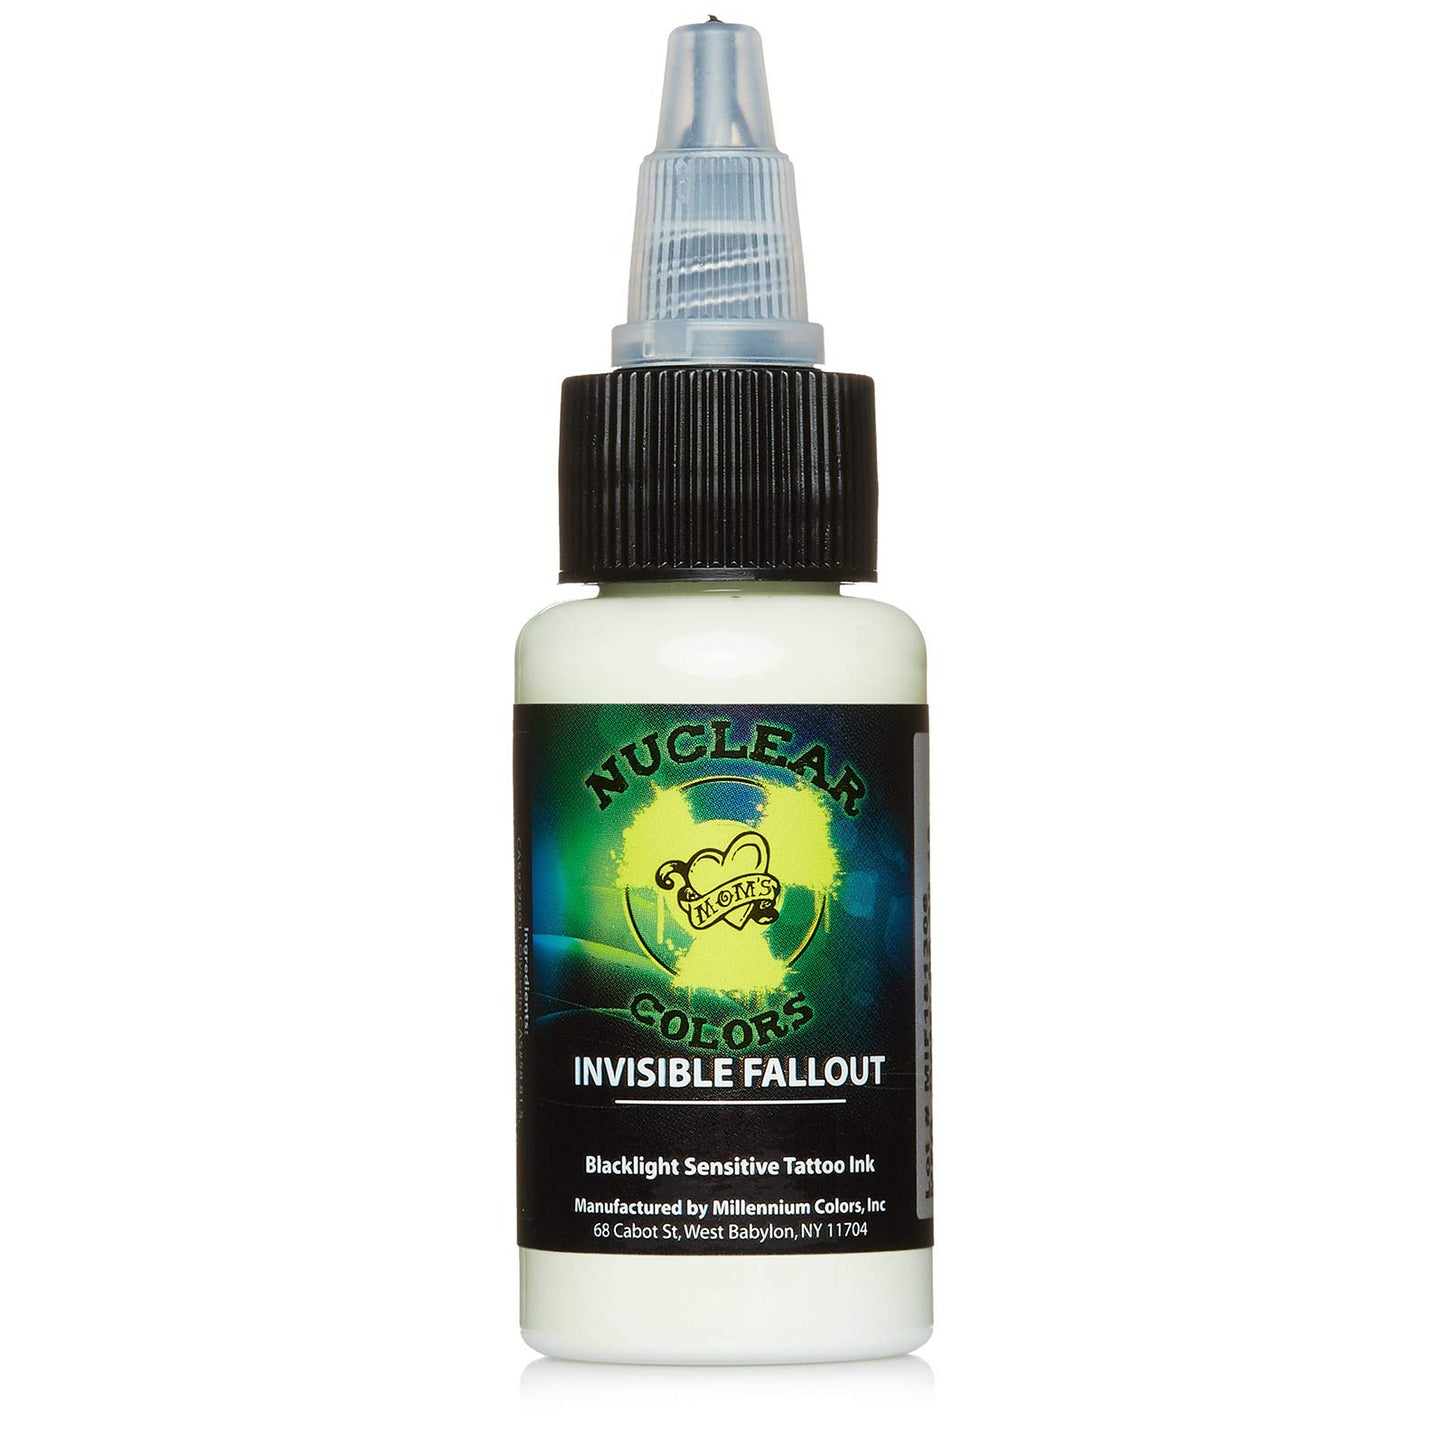 Moms Nuclear UV Tattoo Ink 1 ounce Invisible Fallout Ultra Violet